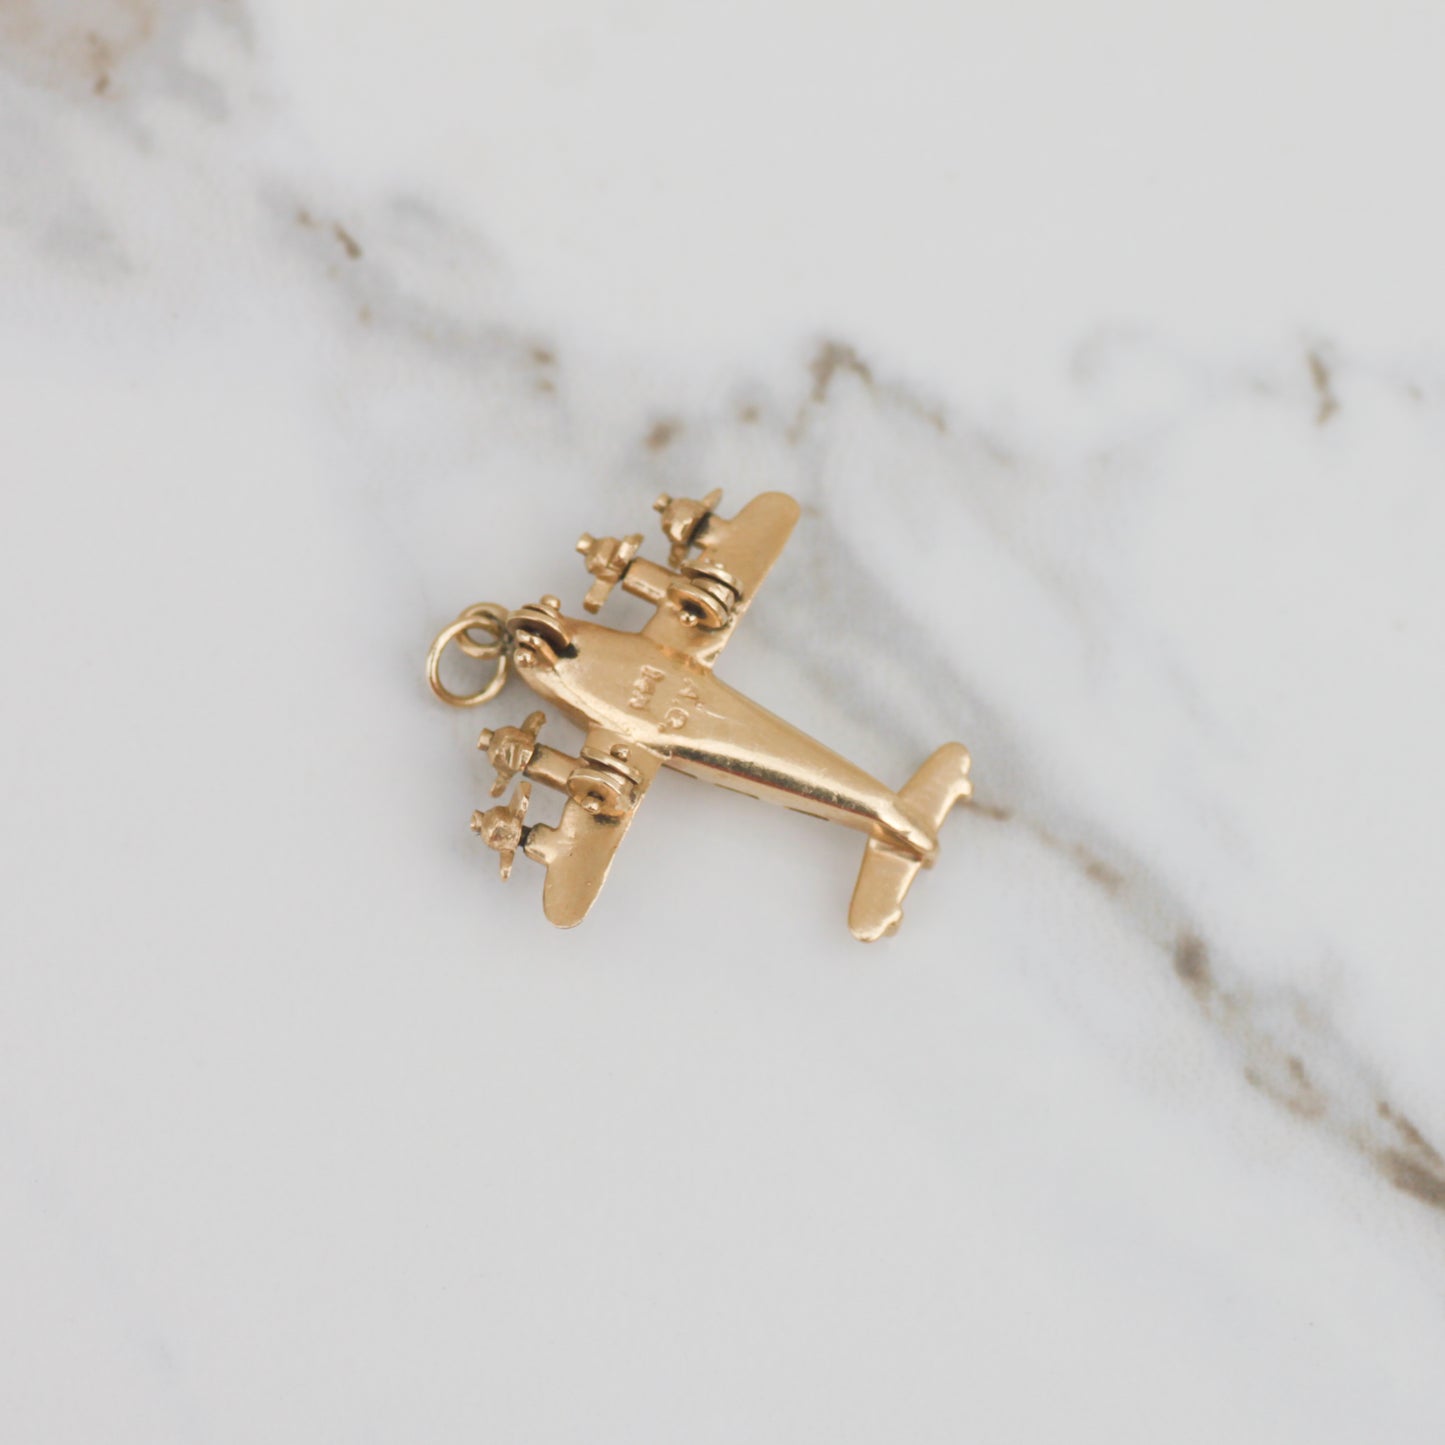 Vintage Articulated Airplane Charm 14k